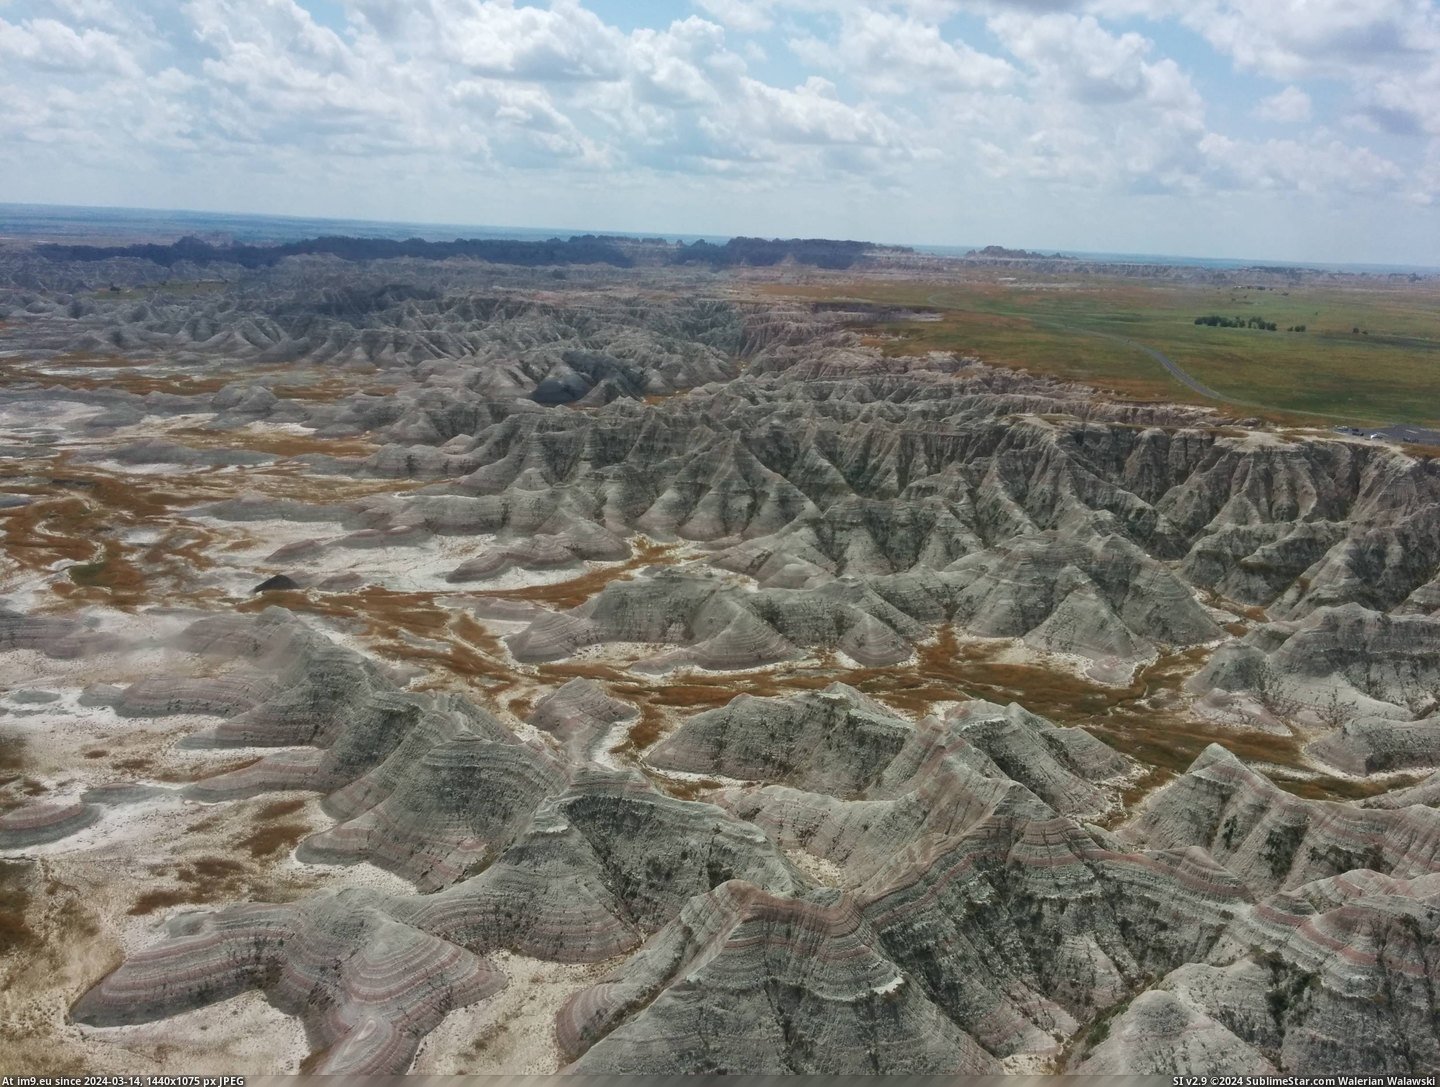 #Park #National #South #Helicopter #Badlands #Ride #3264x2448 #Dakota [Earthporn] My first helicopter ride at Badlands National Park in South Dakota.  [3264x2448] Pic. (Image of album My r/EARTHPORN favs))